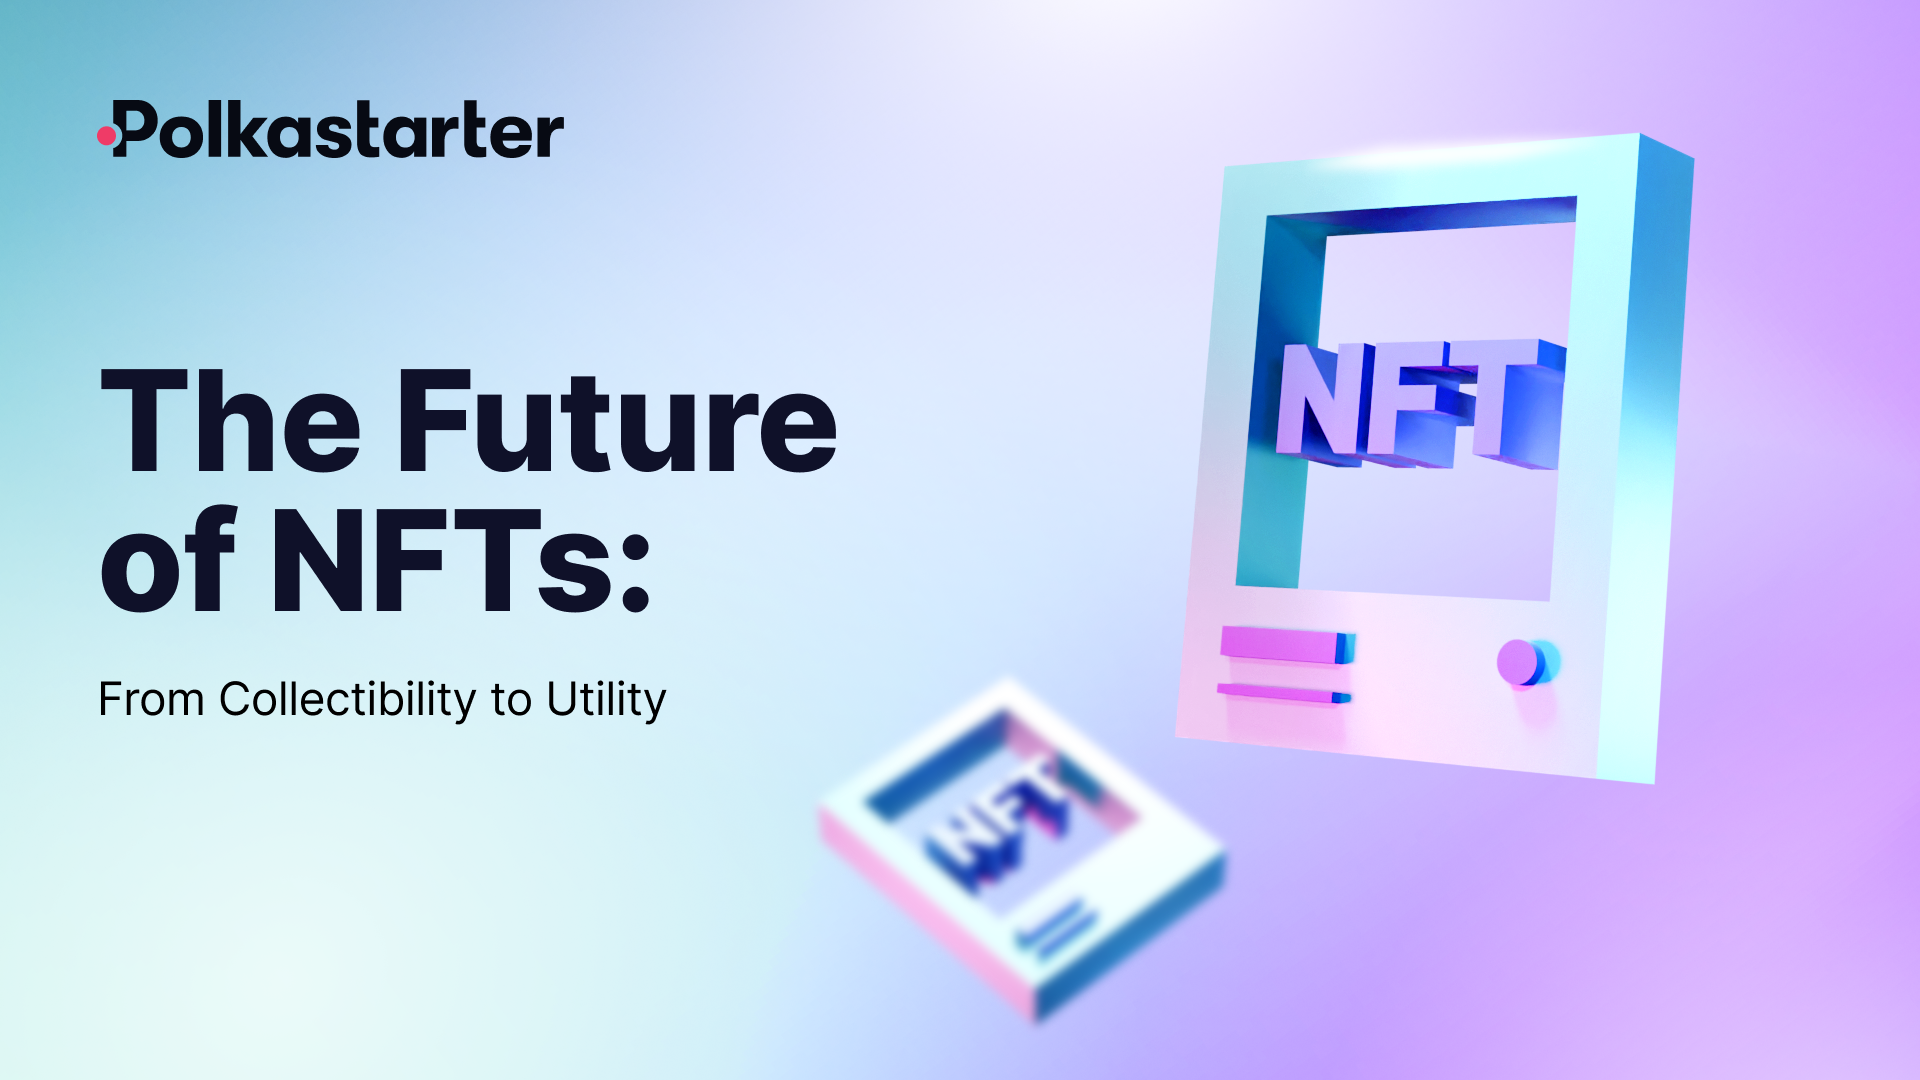 The Future of NFTs: From Collectibility to Utility